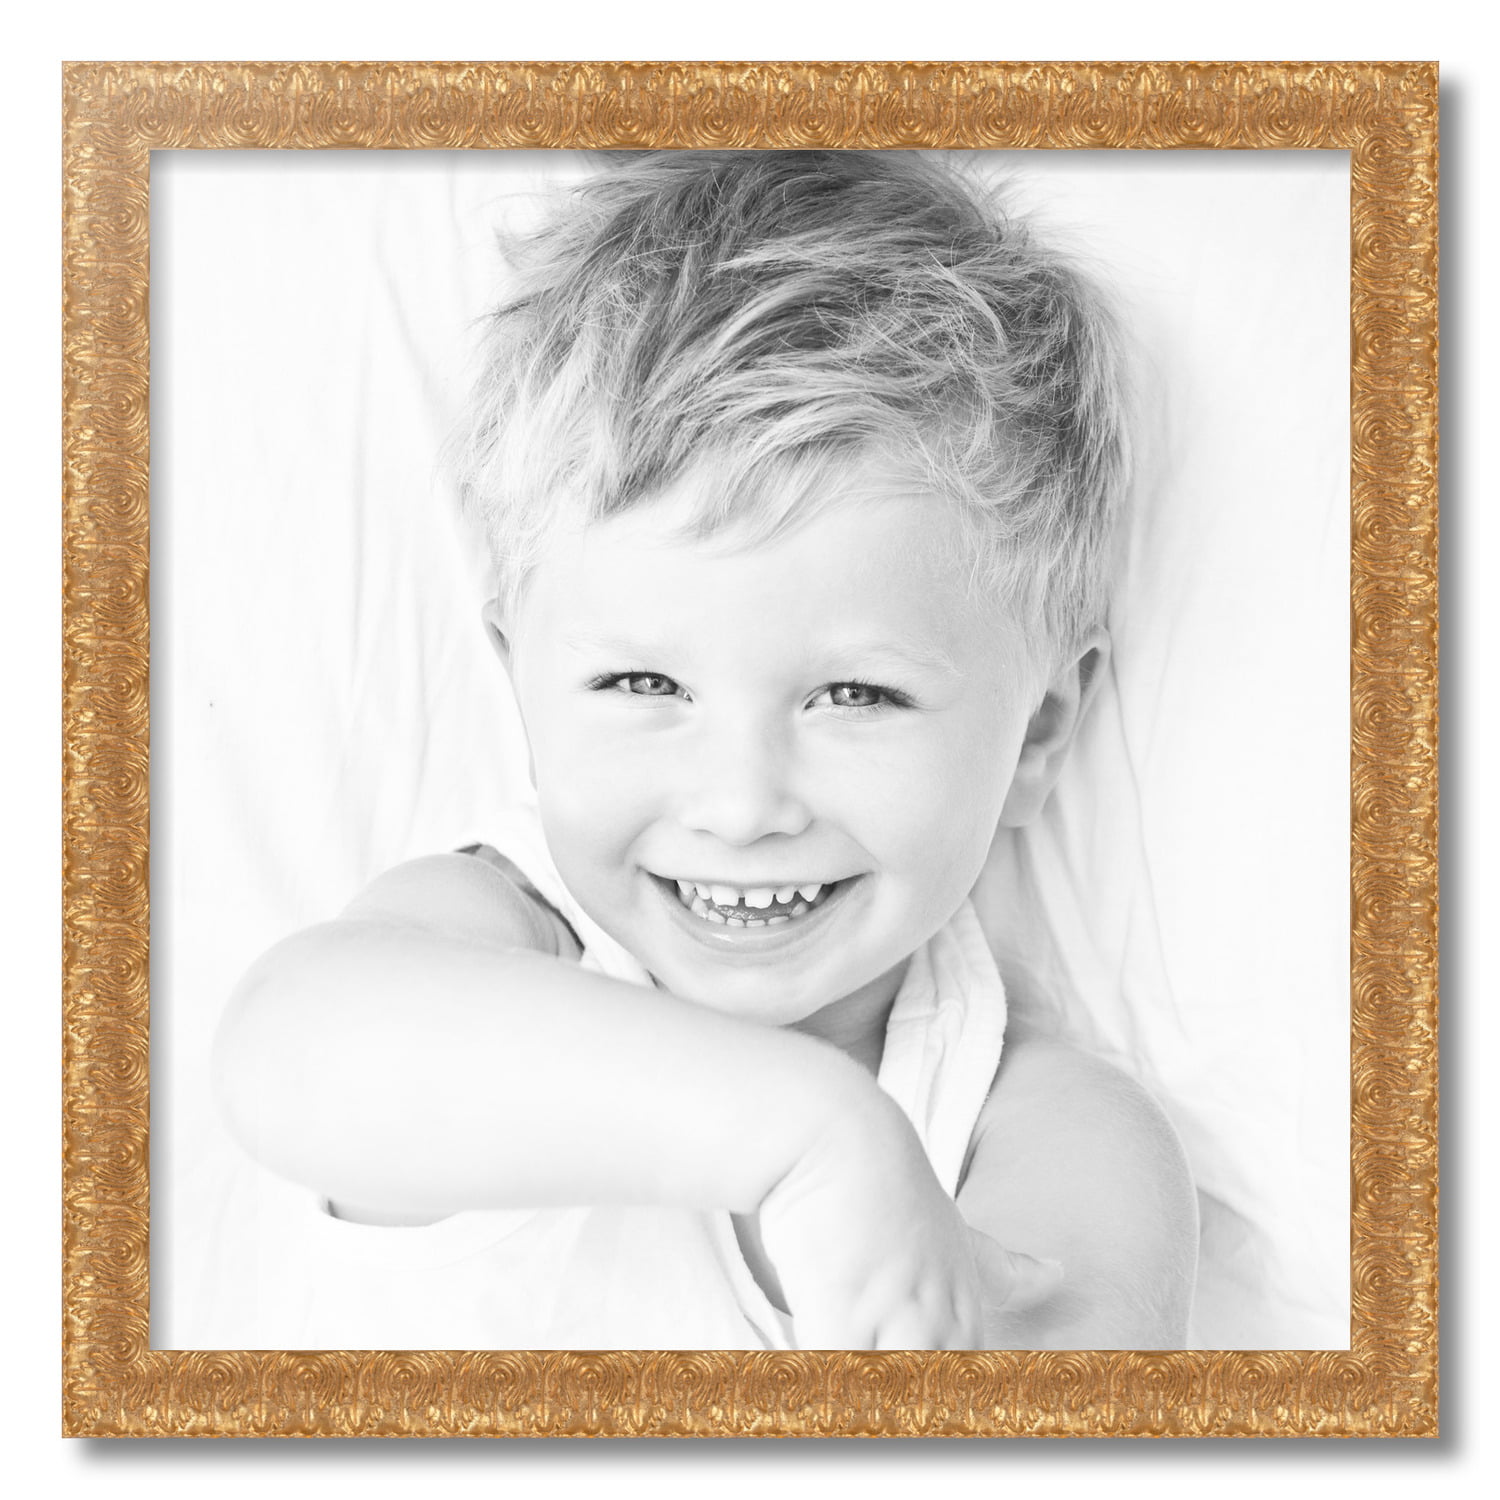 WOMFRBW74074-24x24 for Your Art or Photos This 2 Custom Poster Frame is Modern White Frame ArtToFrames 24x24 Inch White Picture Frame